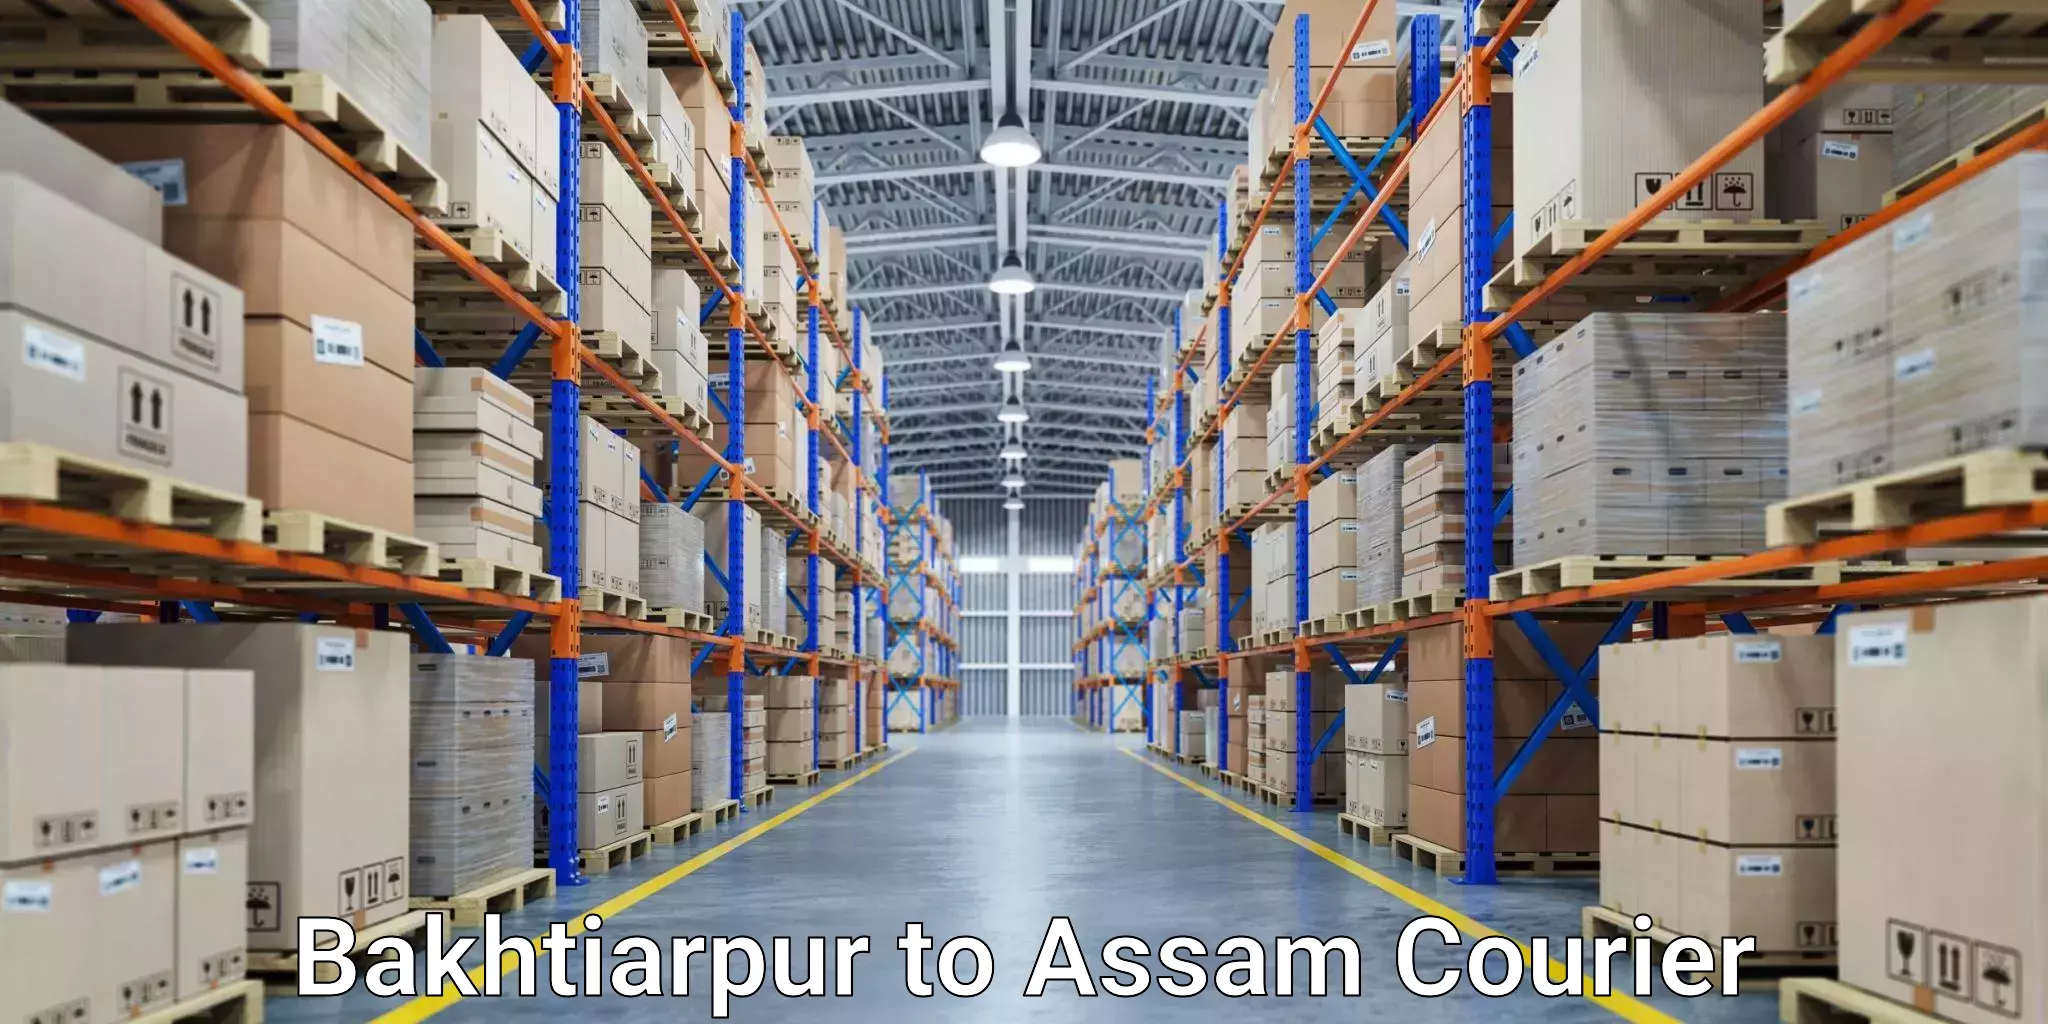 State-of-the-art courier technology Bakhtiarpur to Moranhat